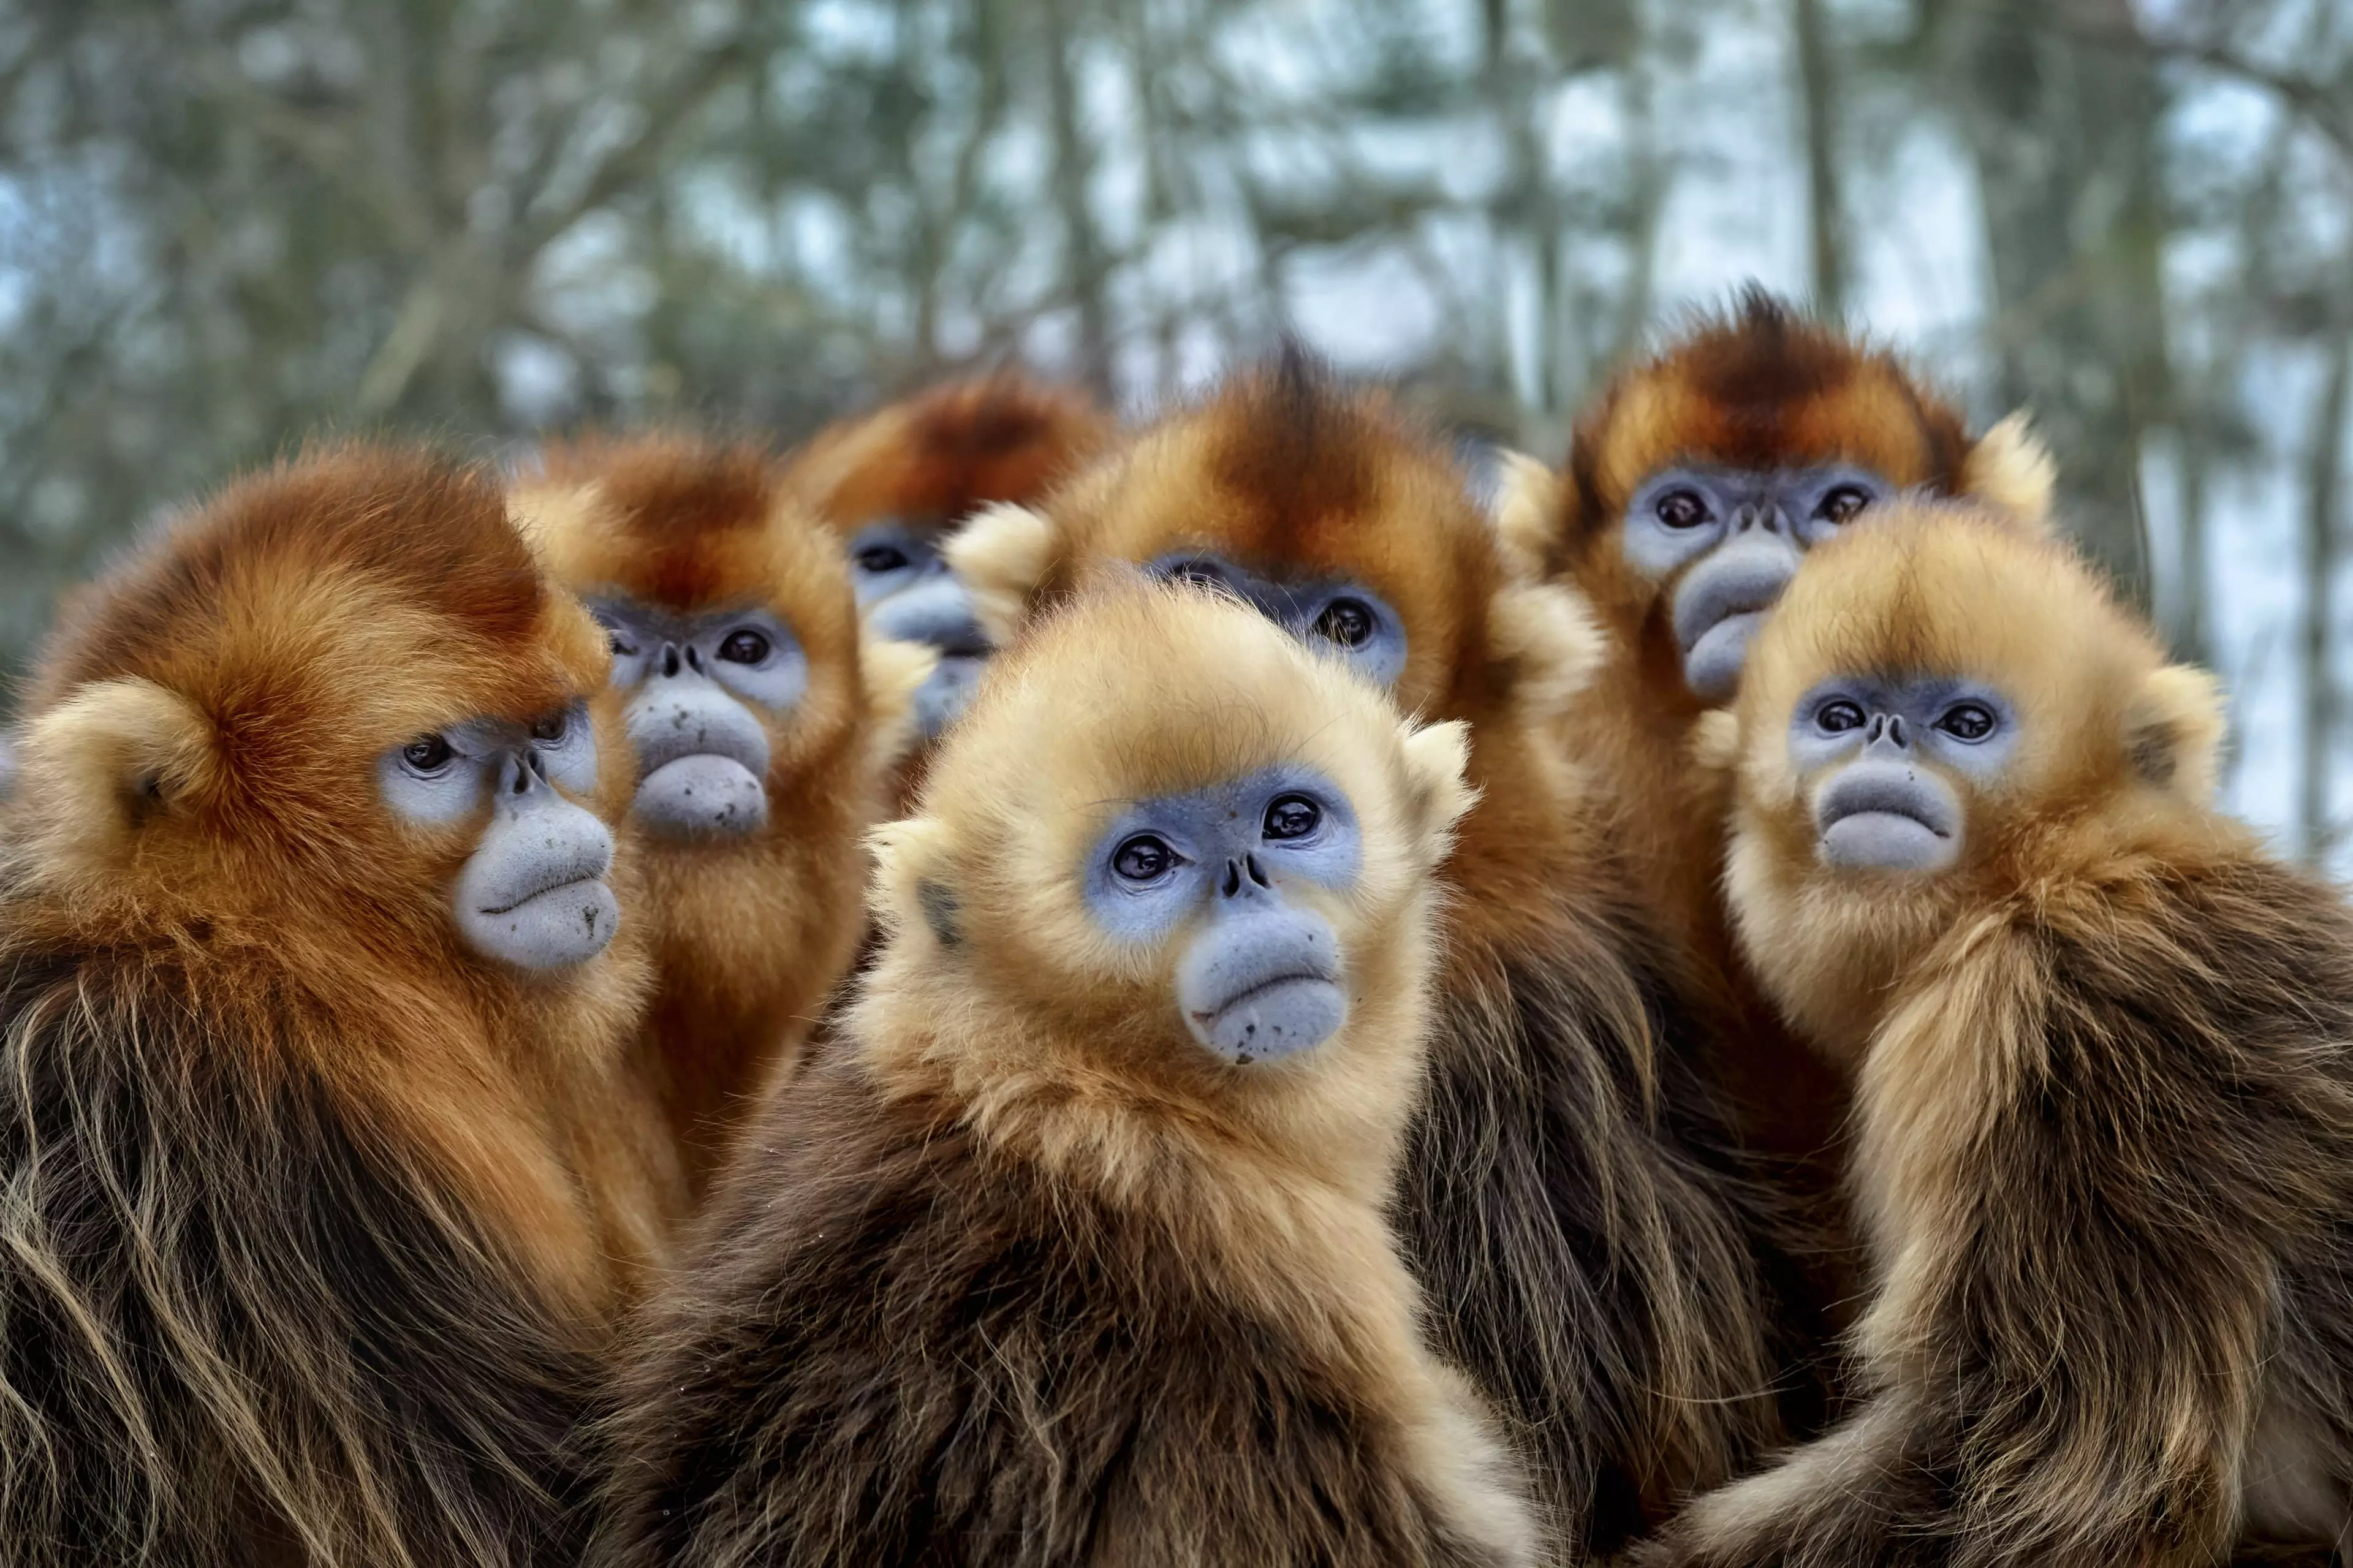 These Golden snub-nosed monkeys were filmed for the series in China. (